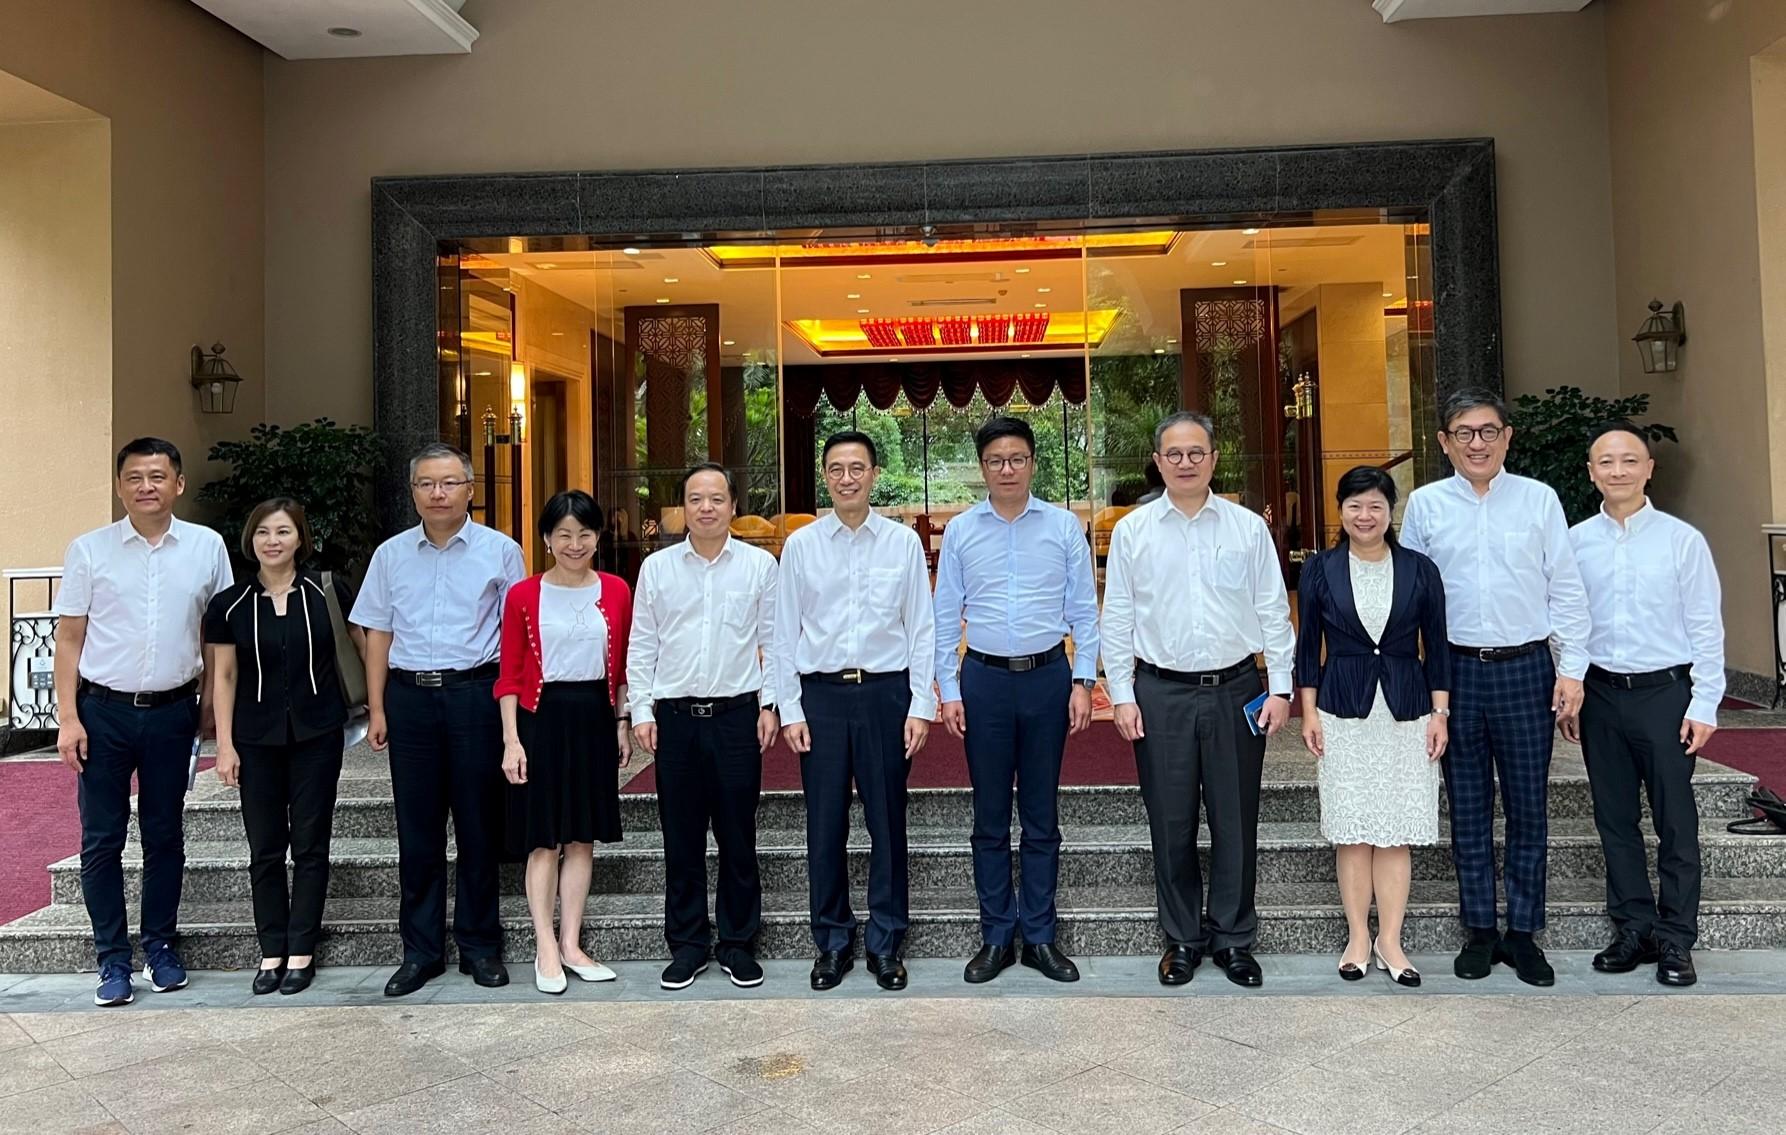 The Secretary for Culture, Sports and Tourism, Mr Kevin Yeung, visited Zhuhai today (August 17). Photo shows Mr Yeung (centre); the Permanent Secretary for Culture, Sports and Tourism, Mr Joe Wong (fourth right); the Commissioner for Tourism, Ms Vivian Sum (fourth left); and the Director of the Zhuhai Municipal Bureau of Culture, Radio, Television, Tourism and Sports, Mr Yan Weimin (third left).